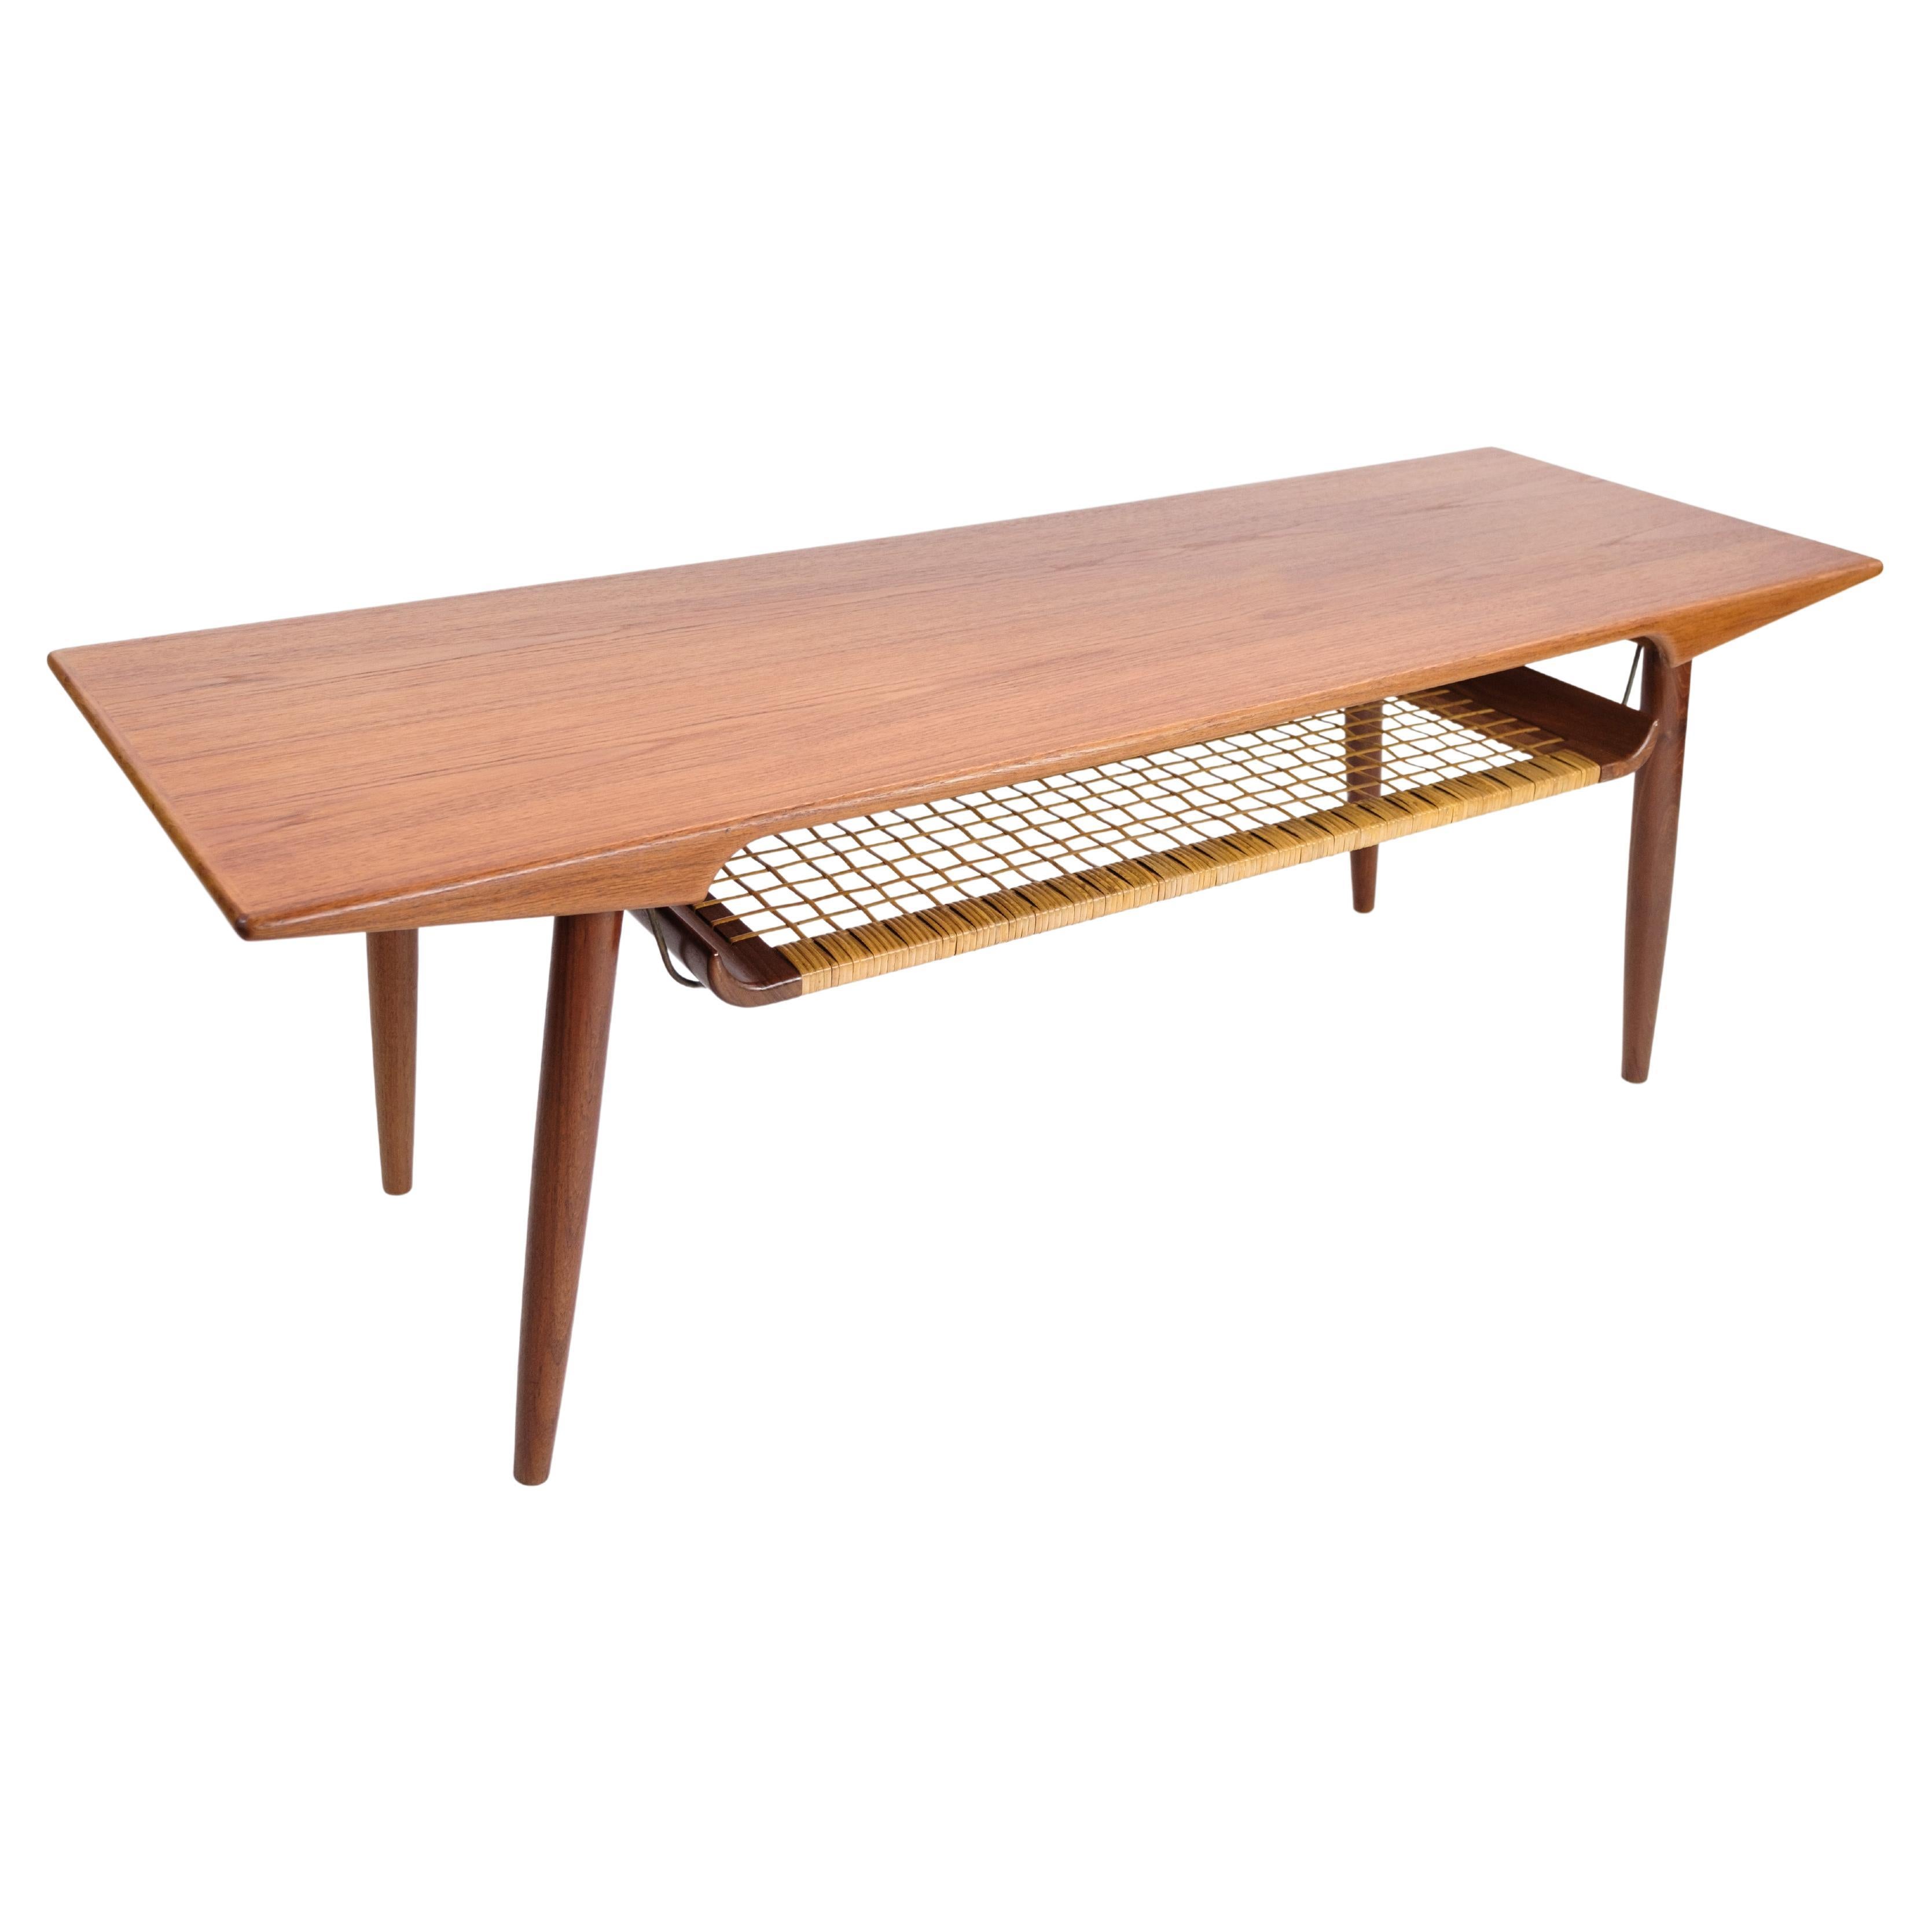 Coffee Table Made In Teak & Paper Cord Shelf, Danish Design From 1960s